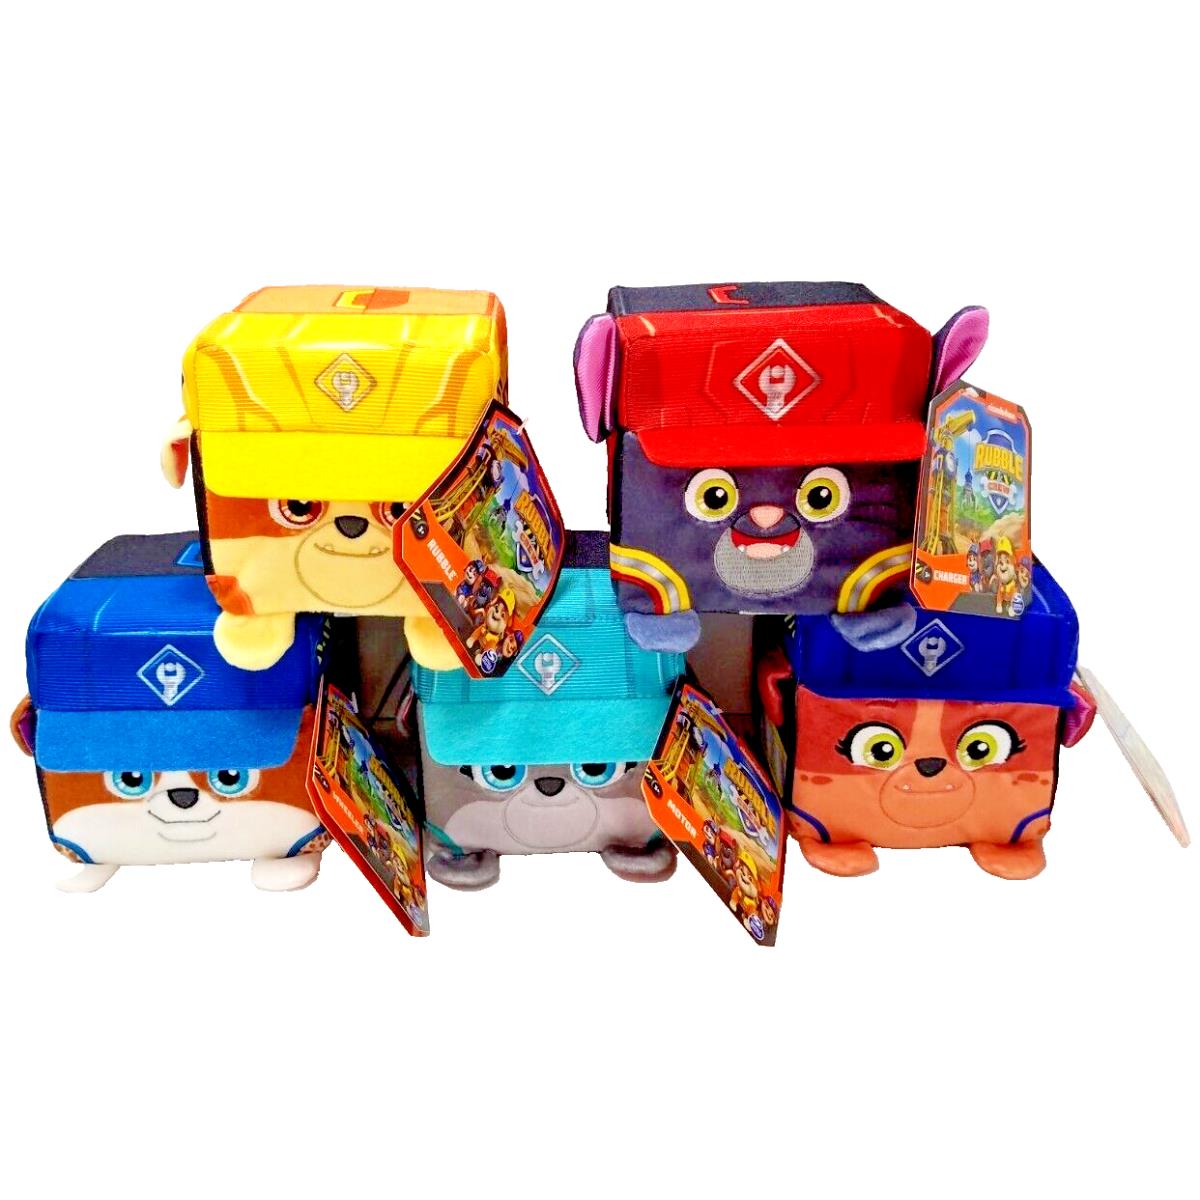 Rubble and Crew Plush Paw Patrol Characters 4 Square/cube Set of 5 Toys Set